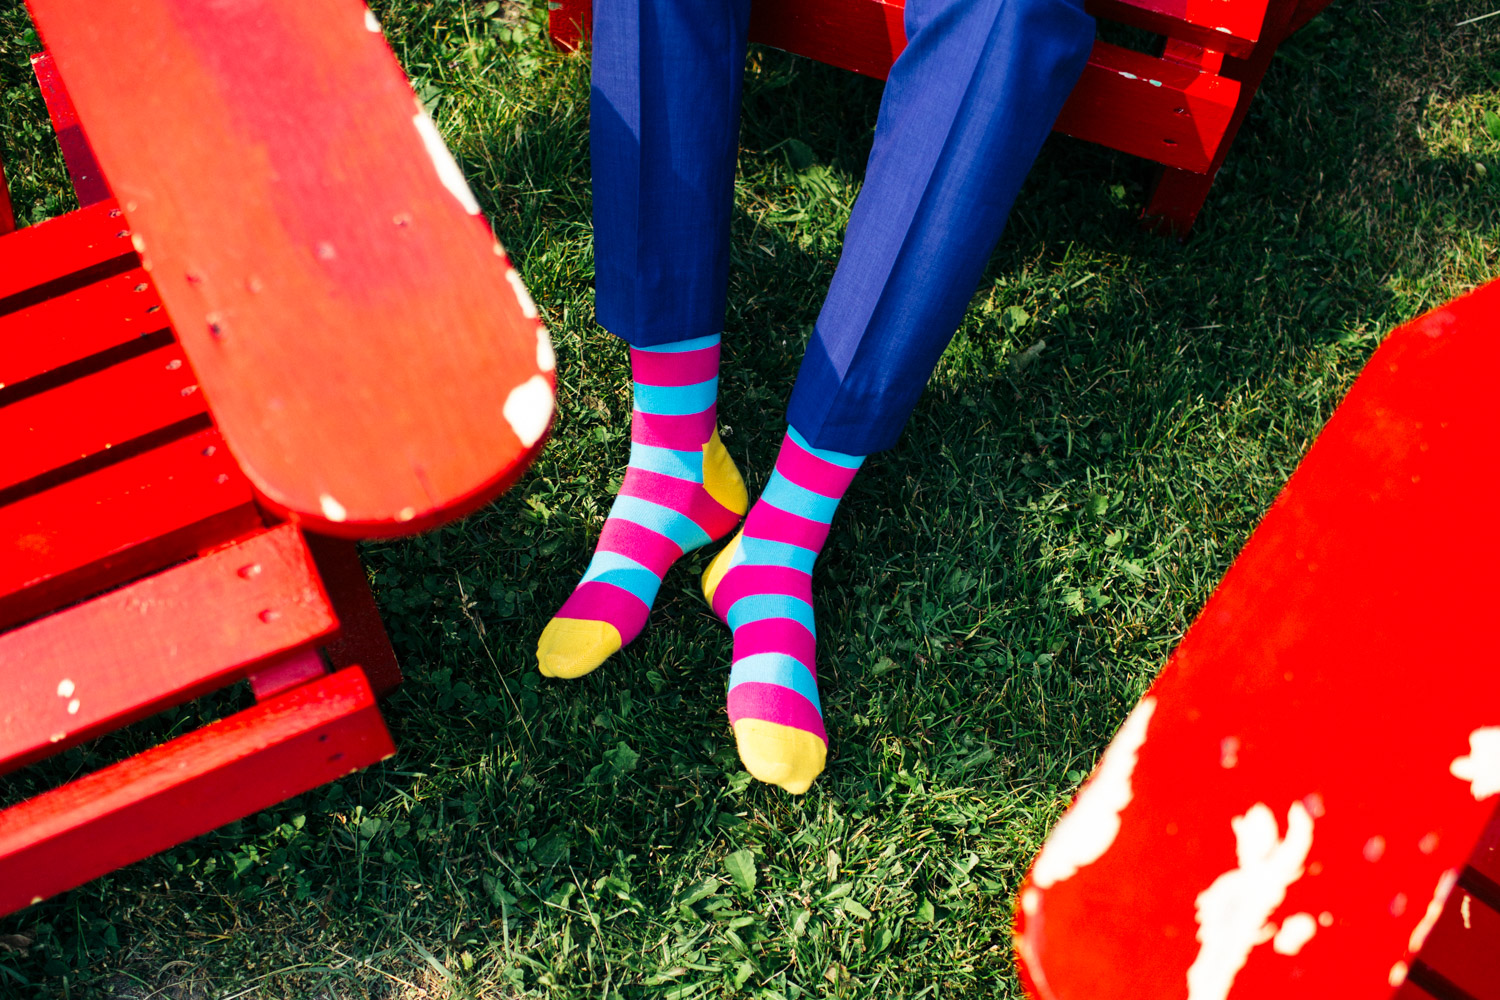 Colorful socks on a grass lawn with red chairs during summer in Nova Scotia, Canada.